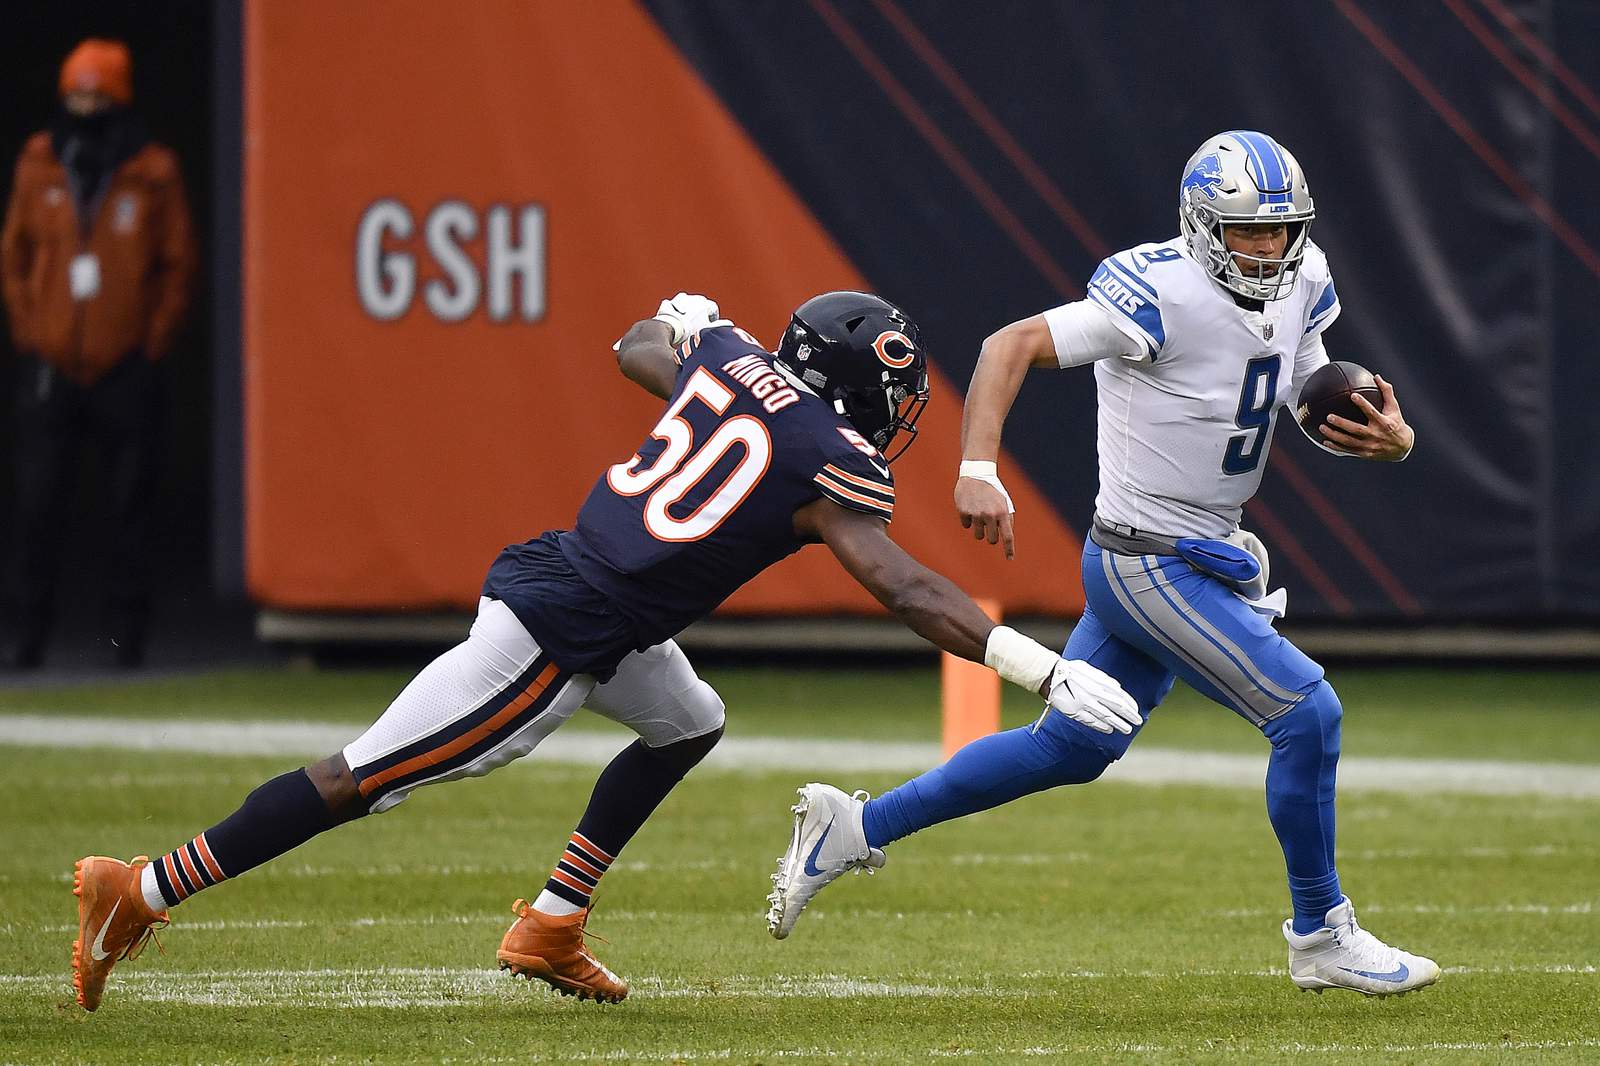 Bears use towel on soggy Soldier Field turf, lose chance at FG